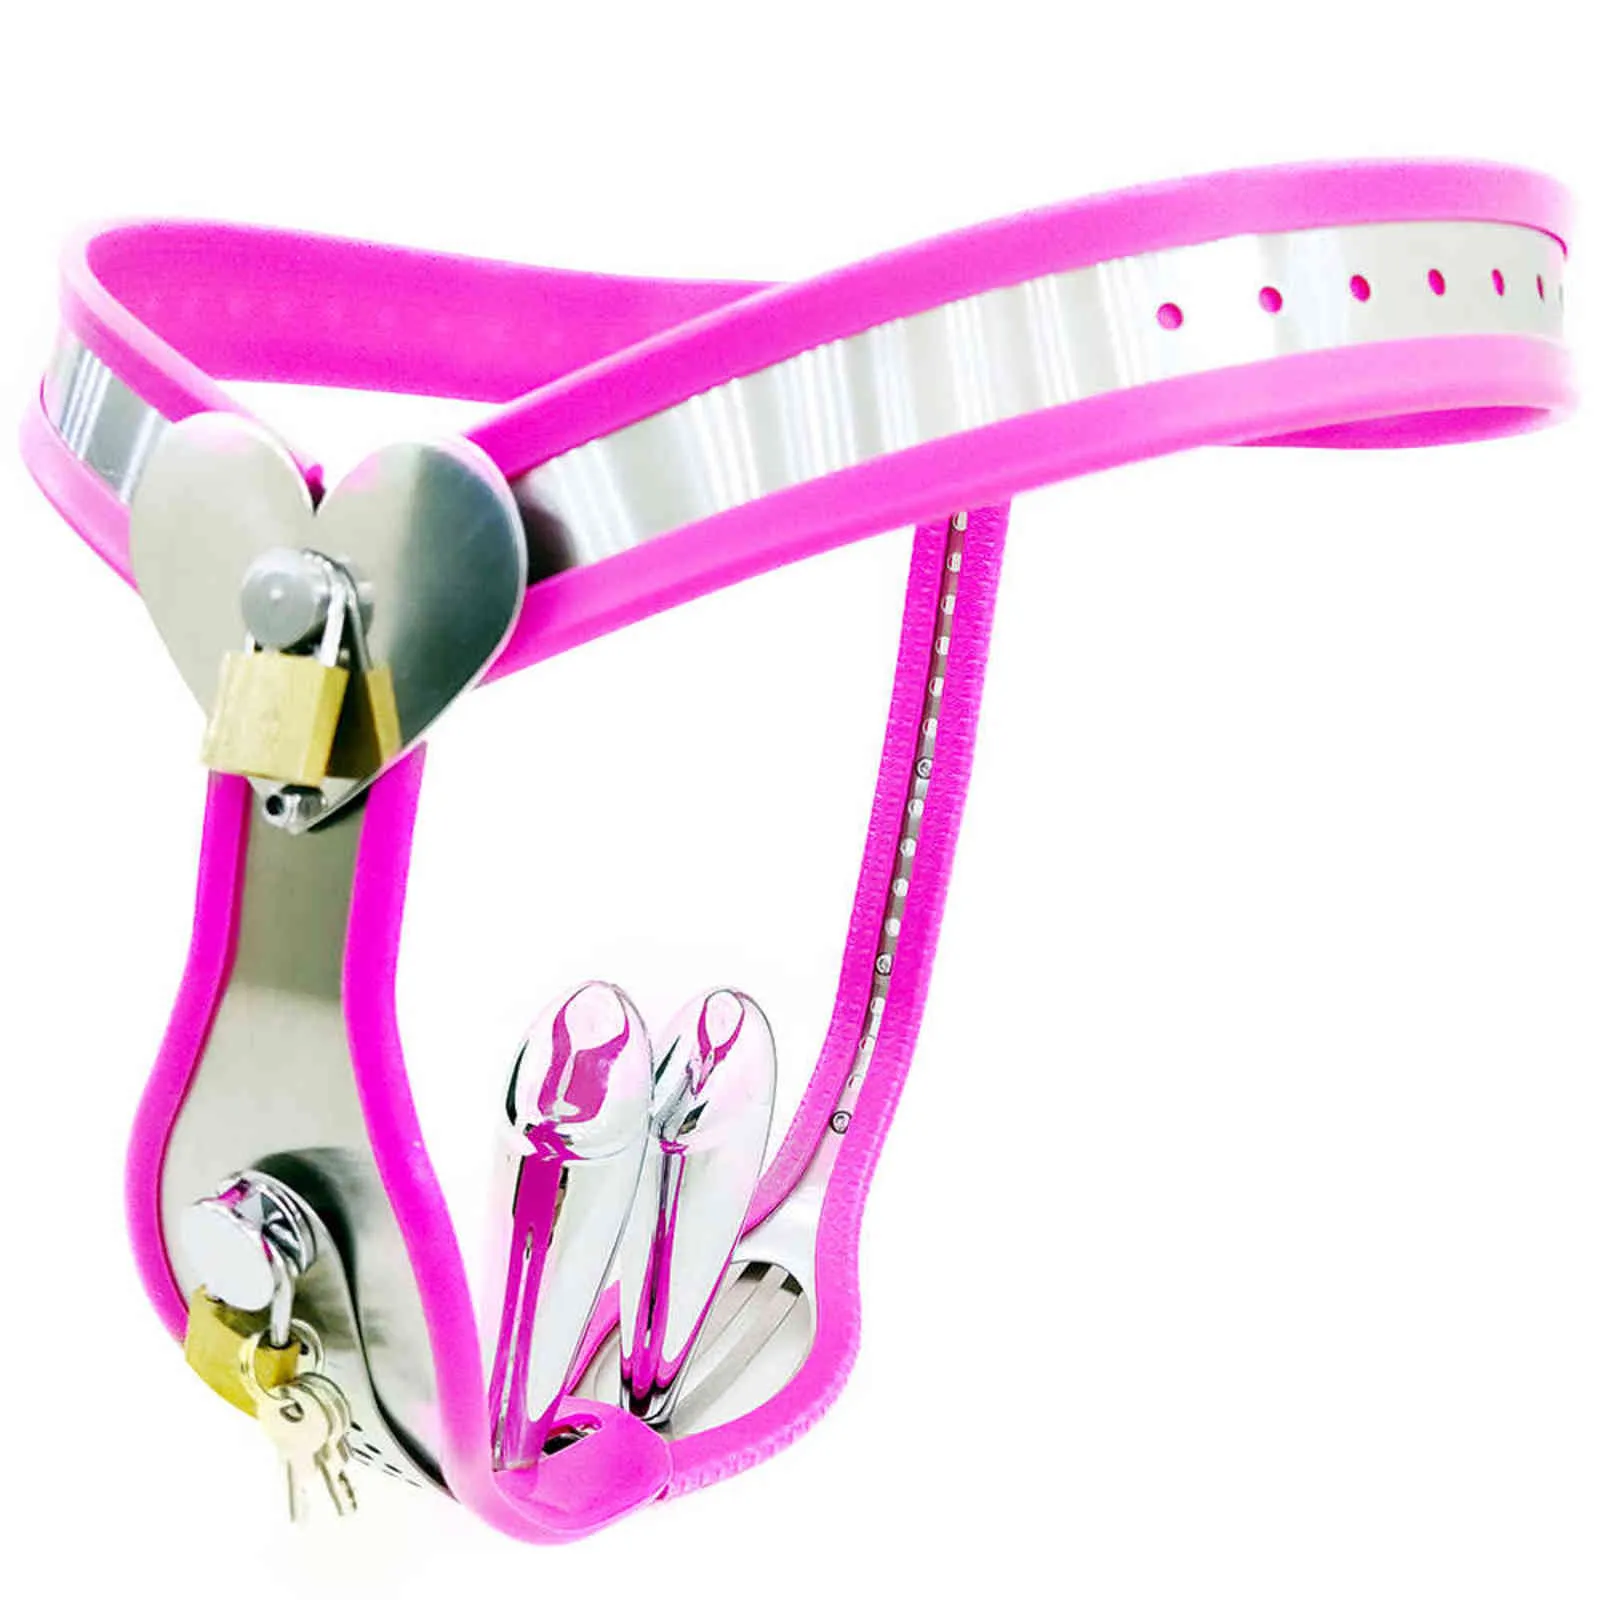 NXY Cockrings Fully Adjustable Female Chastity Belt Metal Underwear Stainless Steel Device BDSM Bondage Restraint Sex Toys For Woman 1124